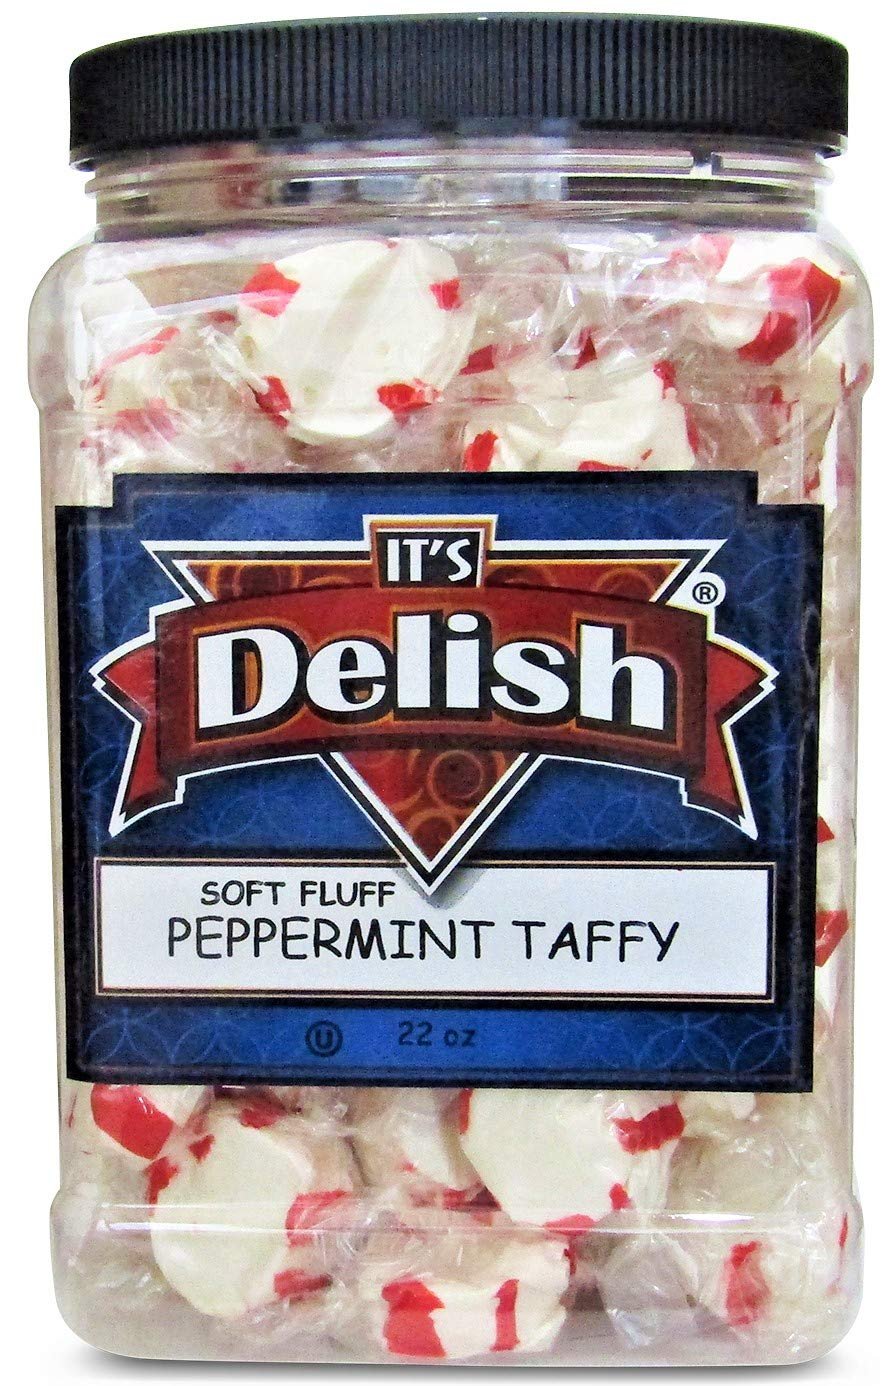 It's Delish Soft Fluff Peppermint Taffy Chews  – 22 Oz Jumbo Reusable Container – Individually Wrapped Minty Sweet & Juicy Candy Taffies